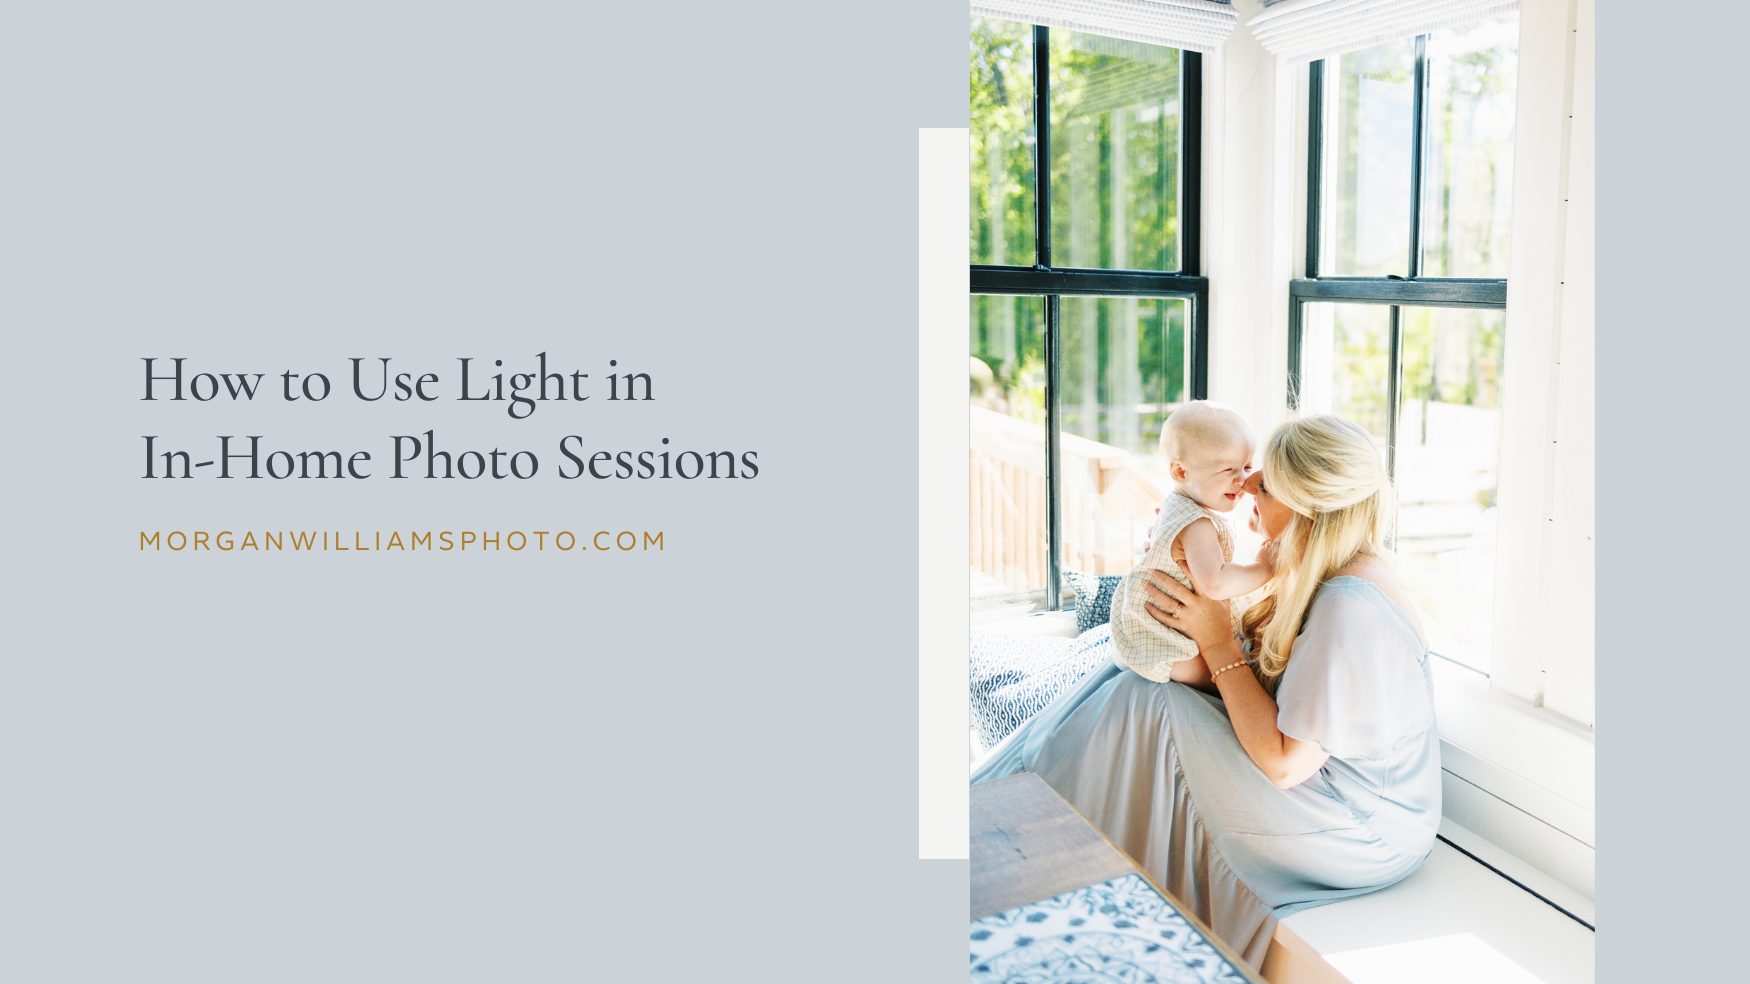 How to use light in in-home photo sessions